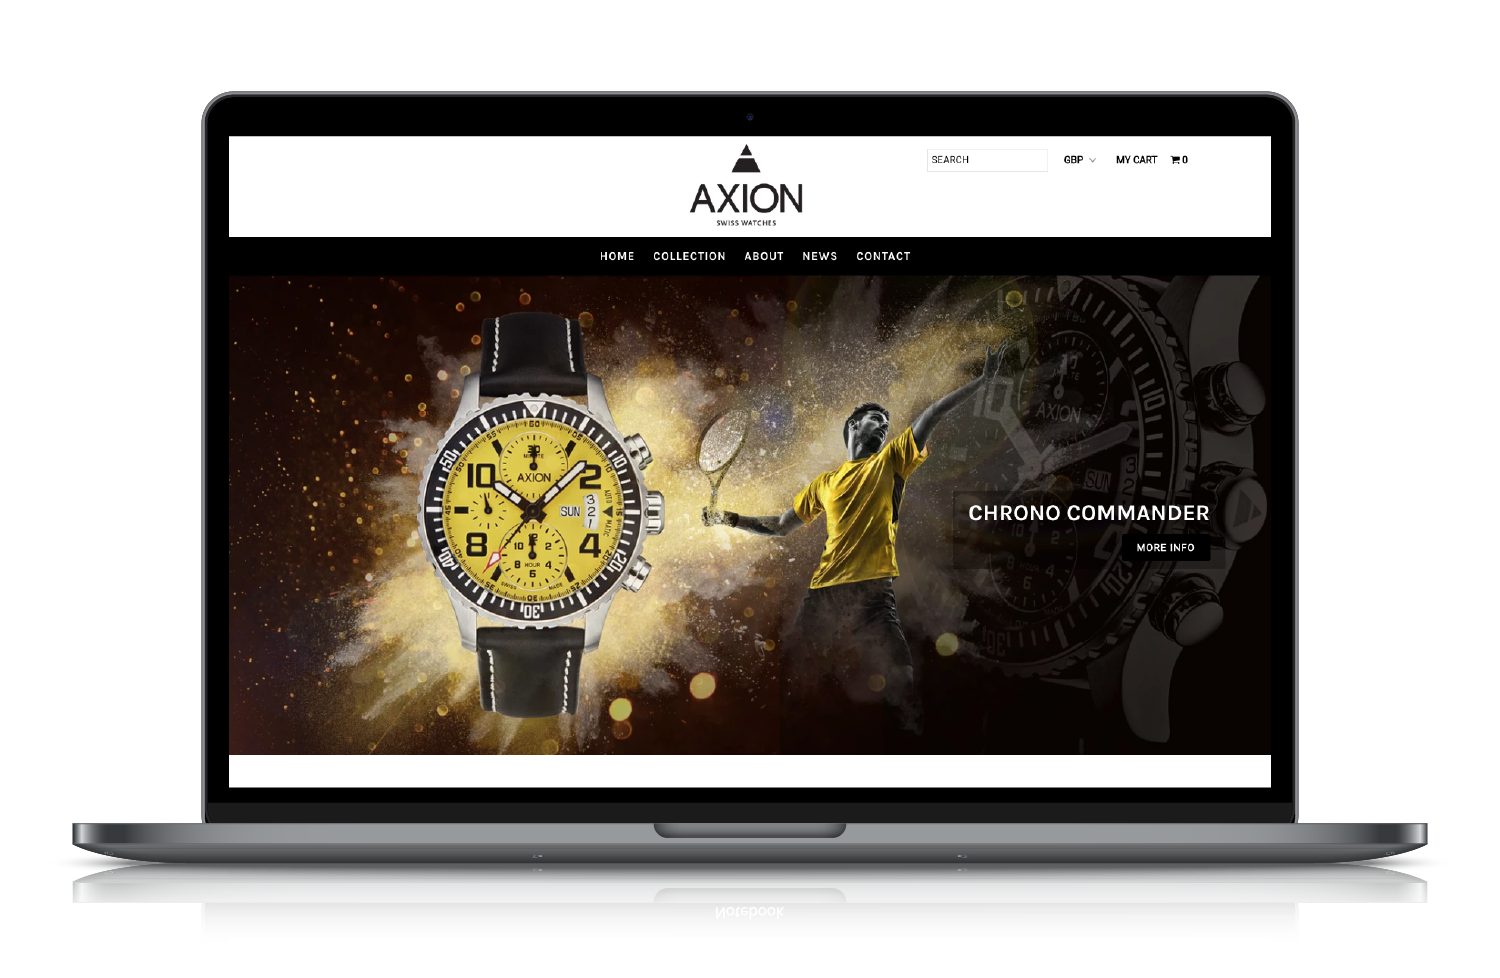 Axion Watches